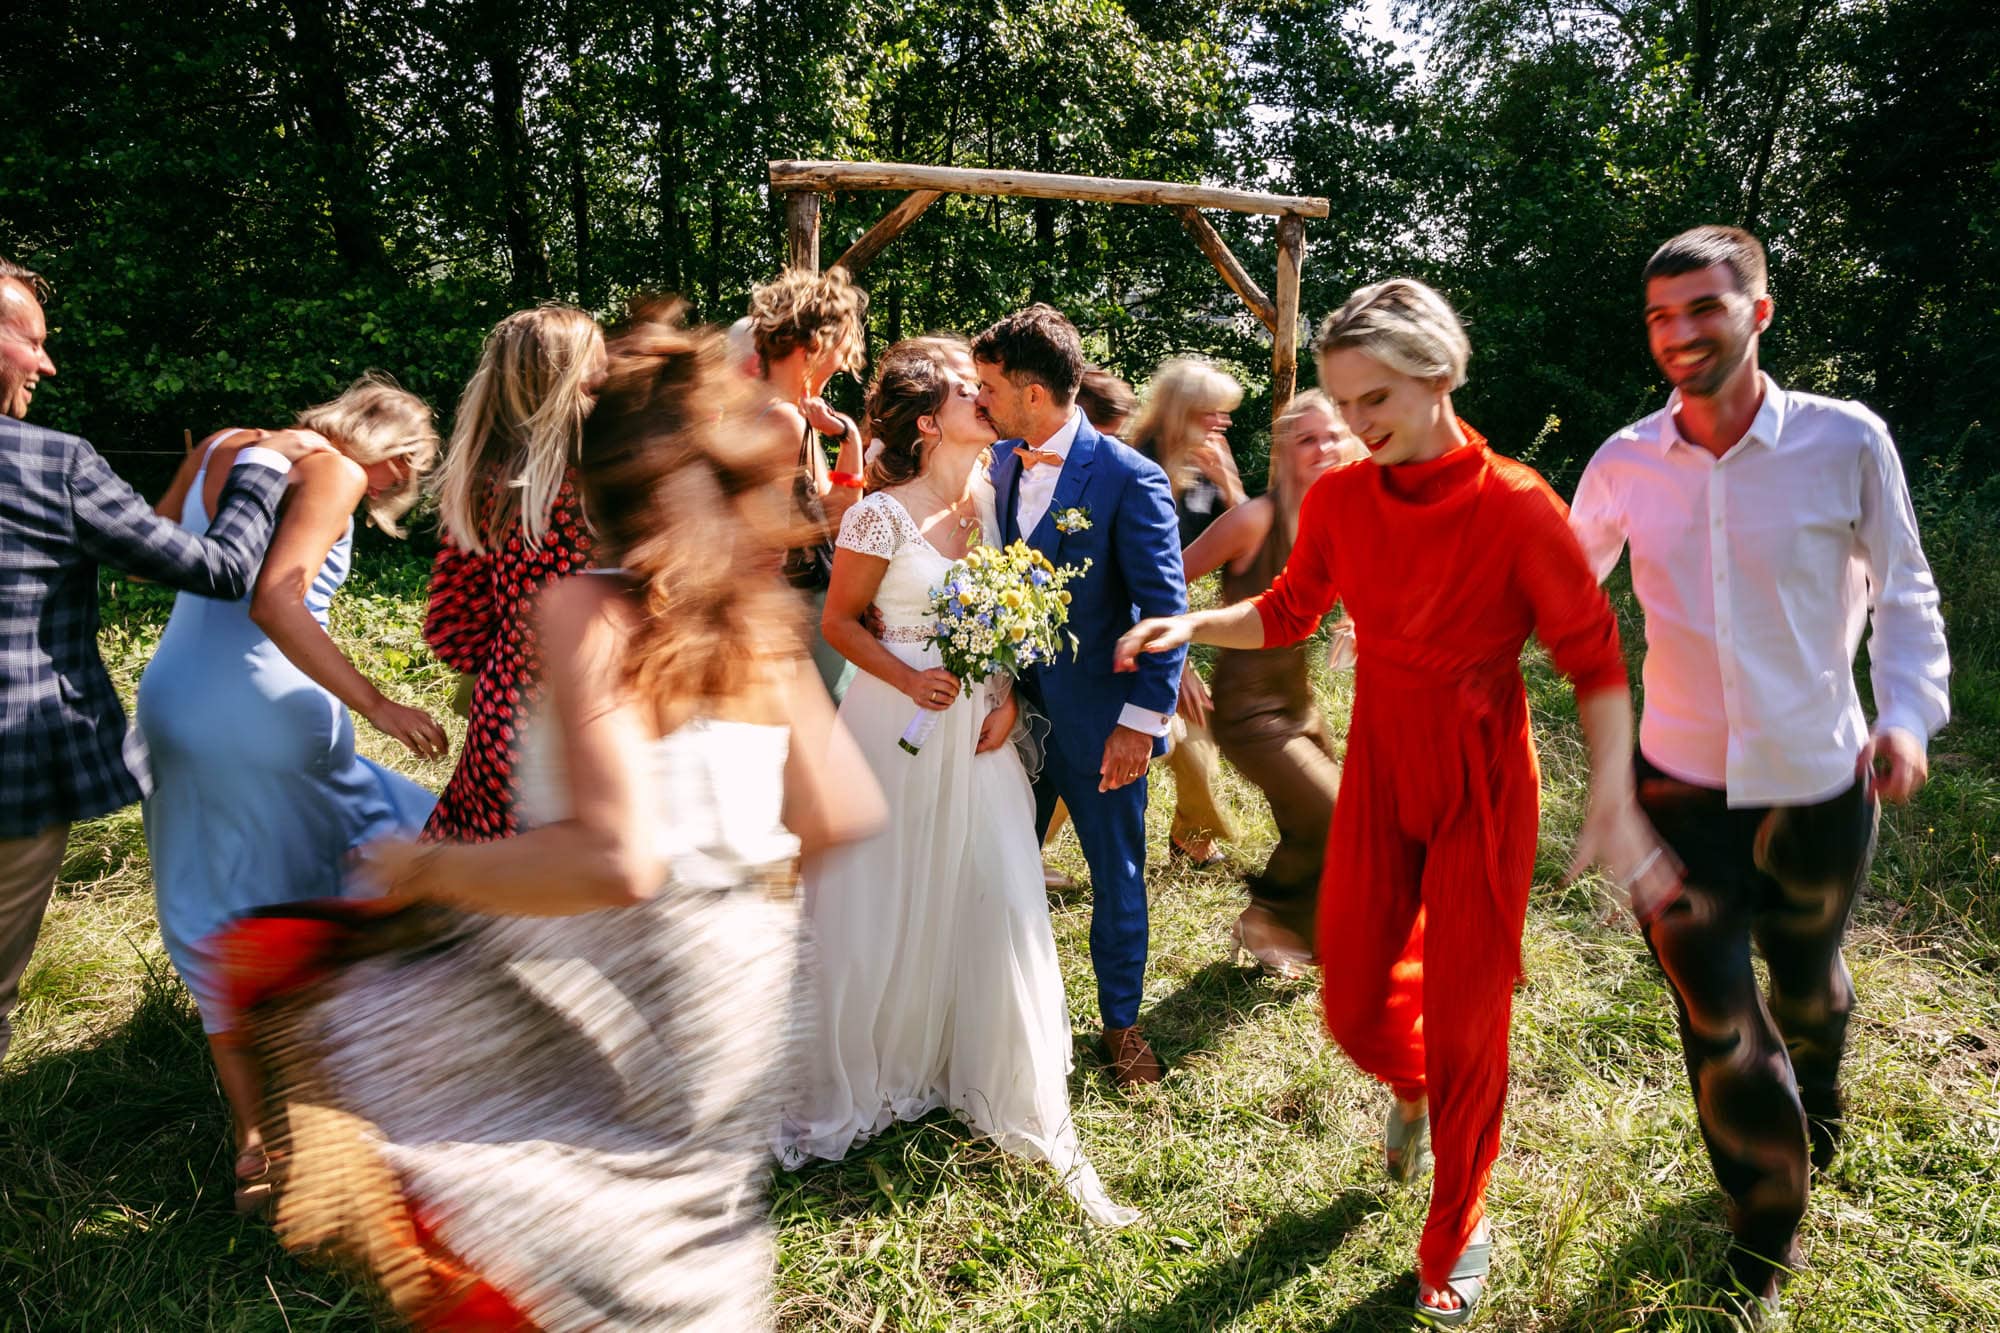 A group of Bohemian brides and grooms dancing in the forest, in beautiful wedding dresses.